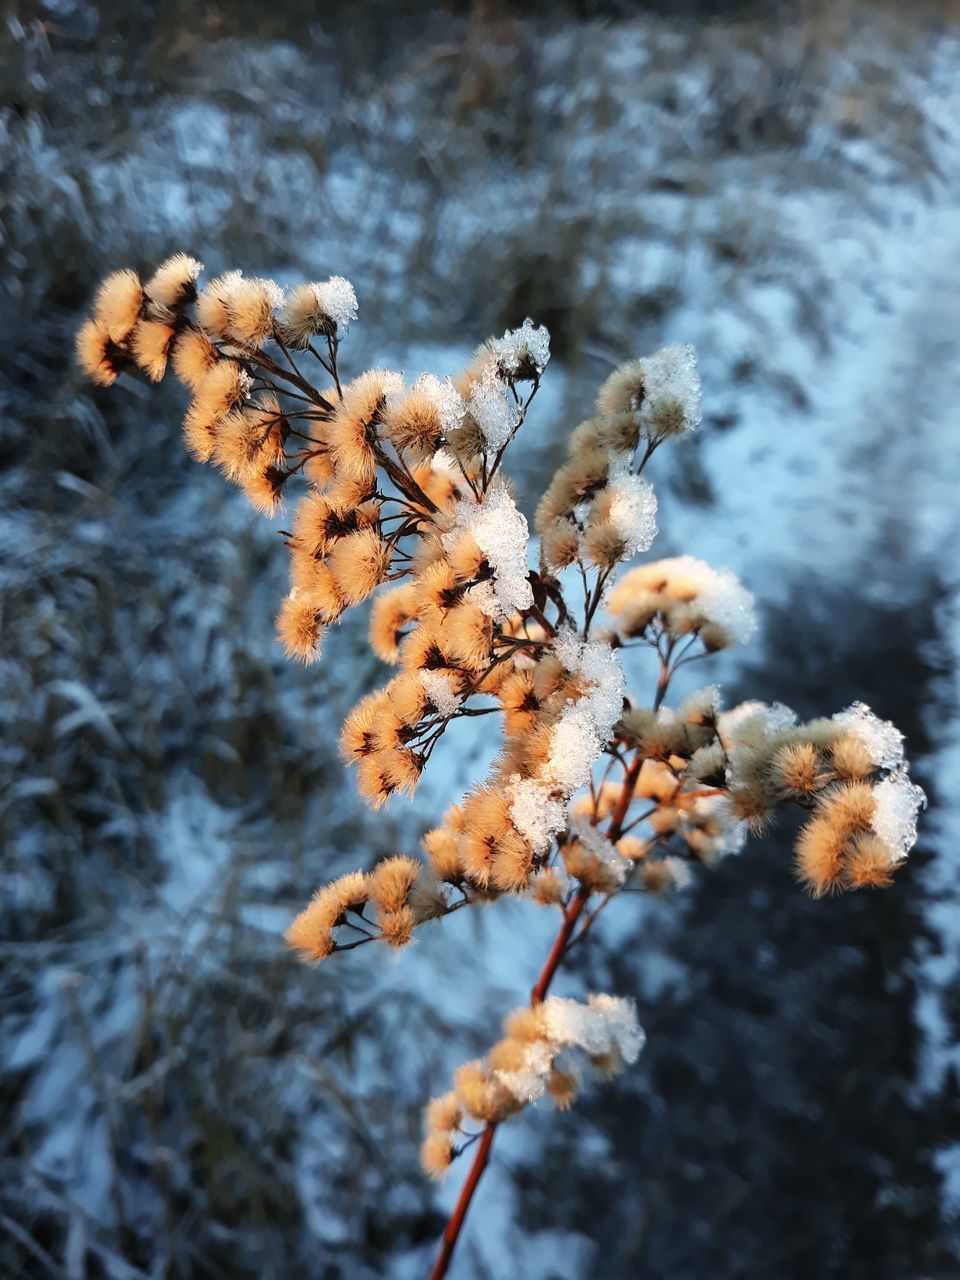 plant, no people, close-up, focus on foreground, growth, nature, fragility, beauty in nature, winter, vulnerability, cold temperature, day, flower, flowering plant, selective focus, snow, outdoors, tranquility, tree, wilted plant, flower head